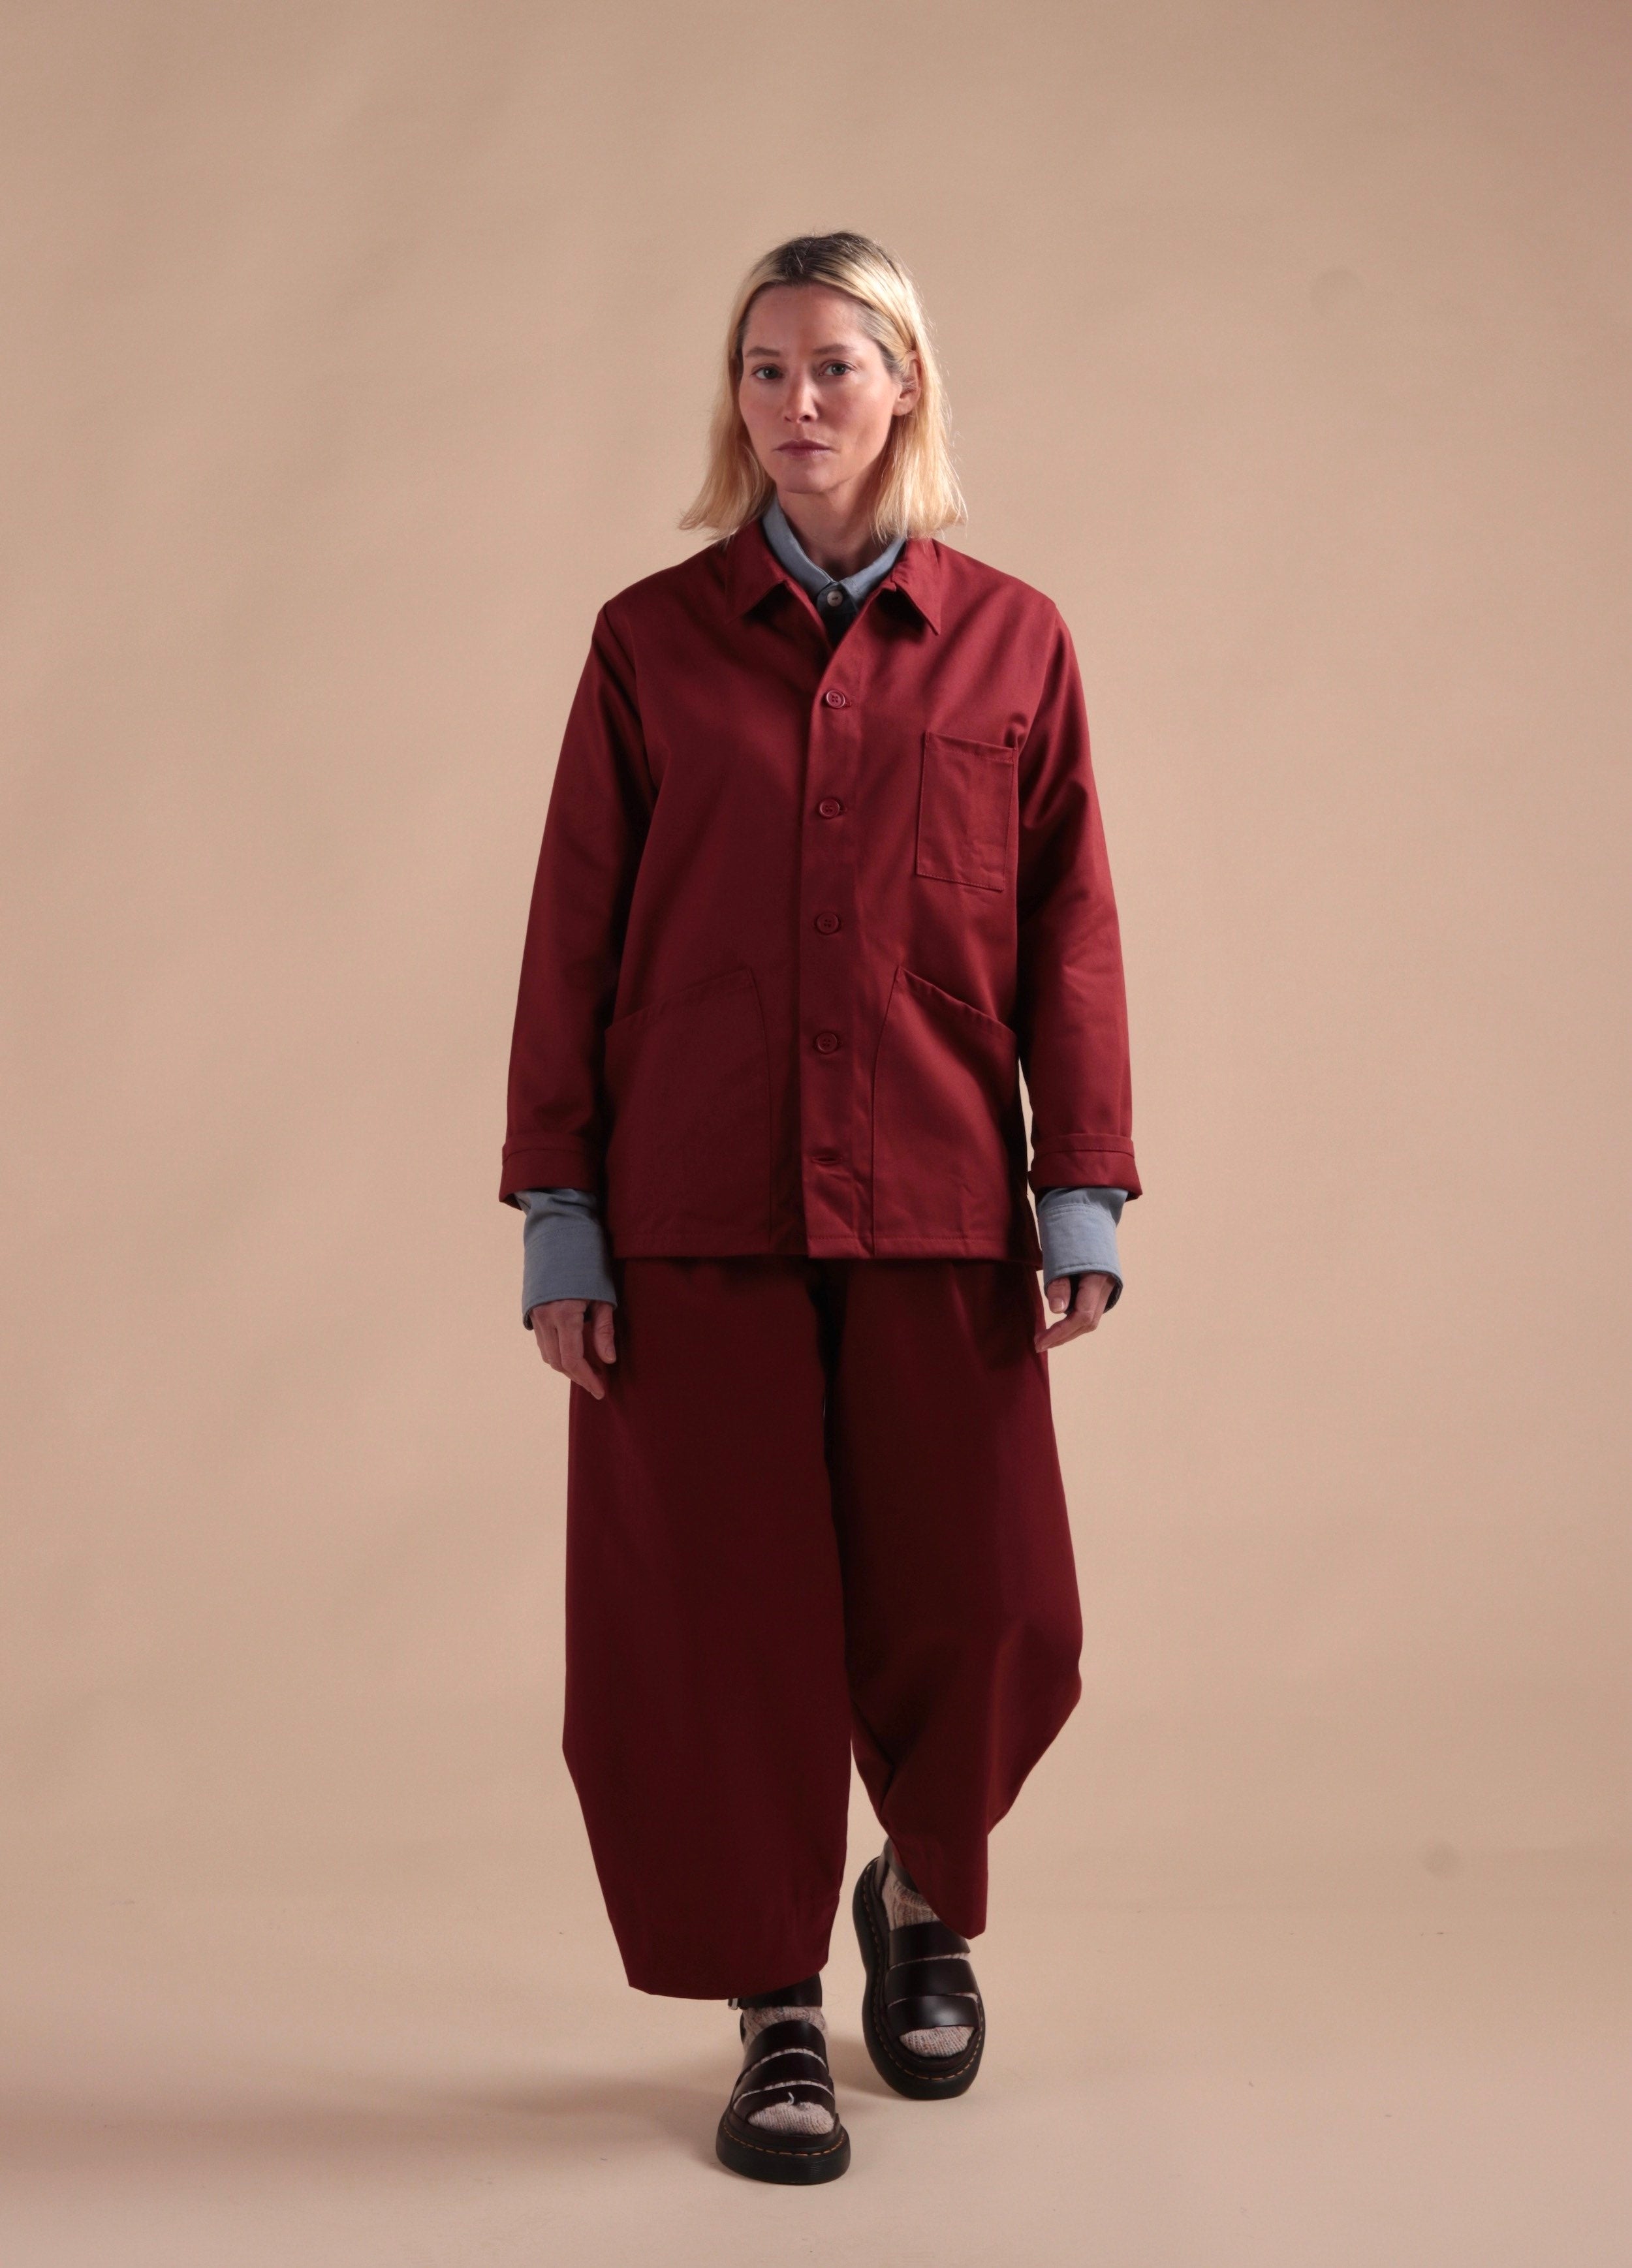 Sienna wears Carrier Company Dutch Trouser in Breton red with Norfolk Work Jacket in Breton Red and Navy Cardigan